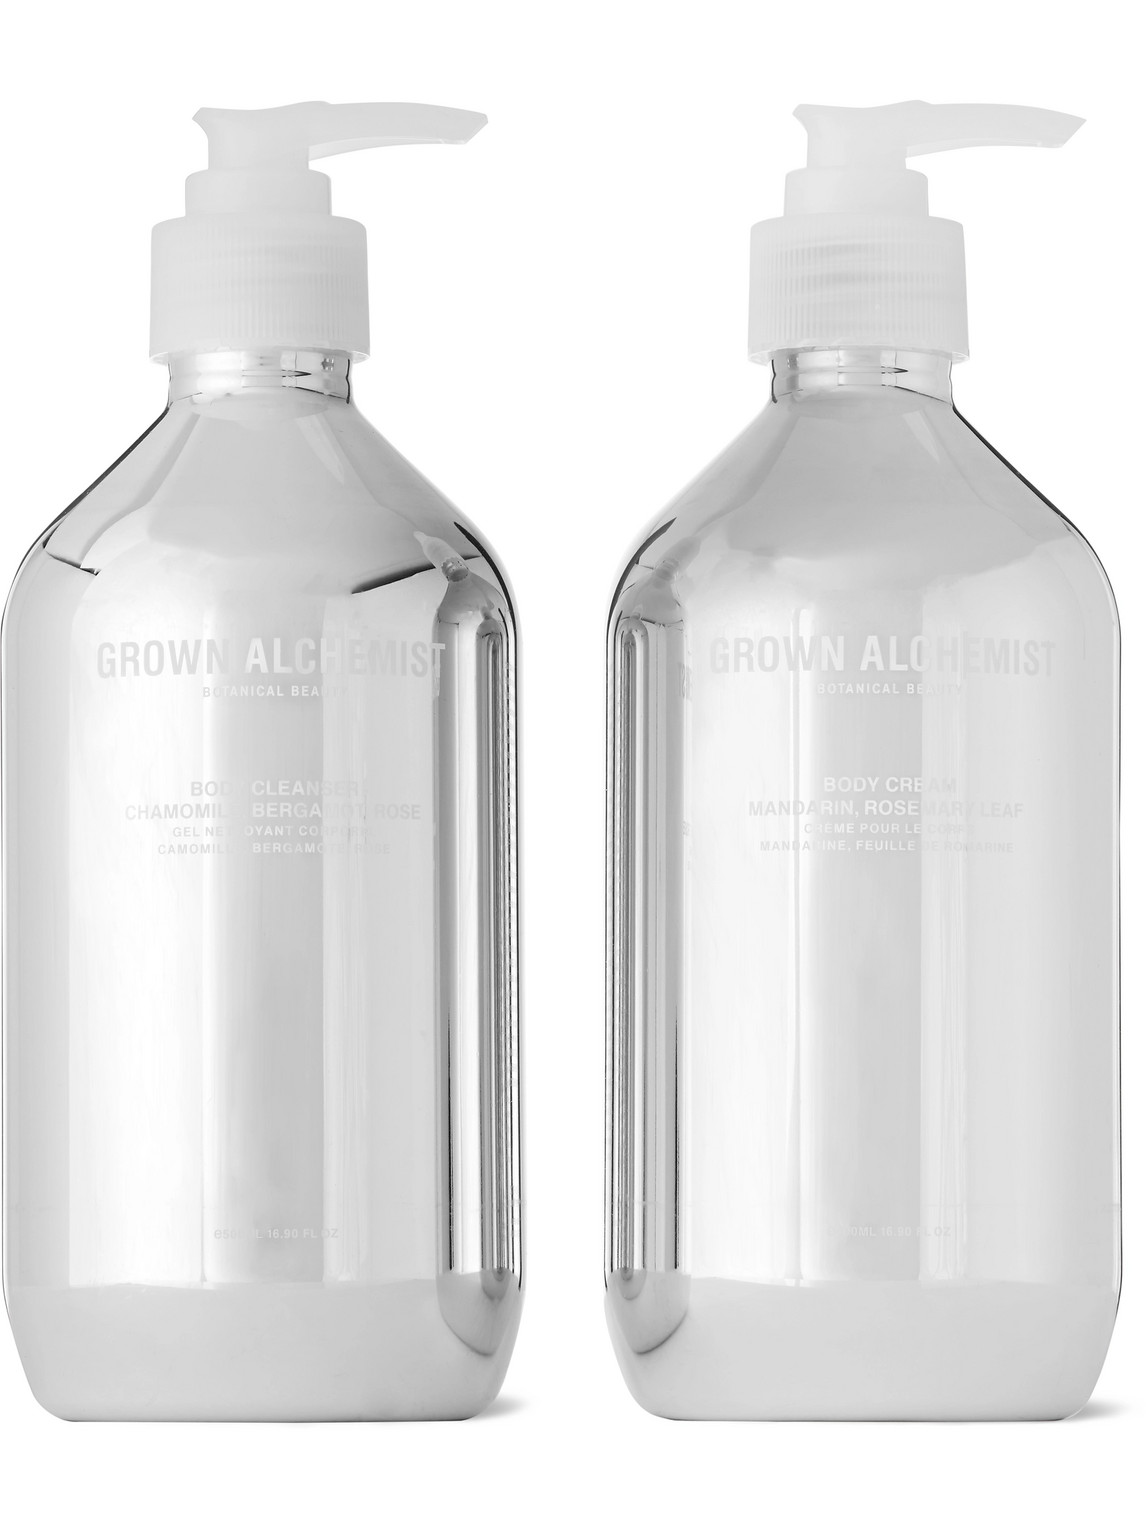 Grown Alchemist Body Cleansing Kit In Colorless